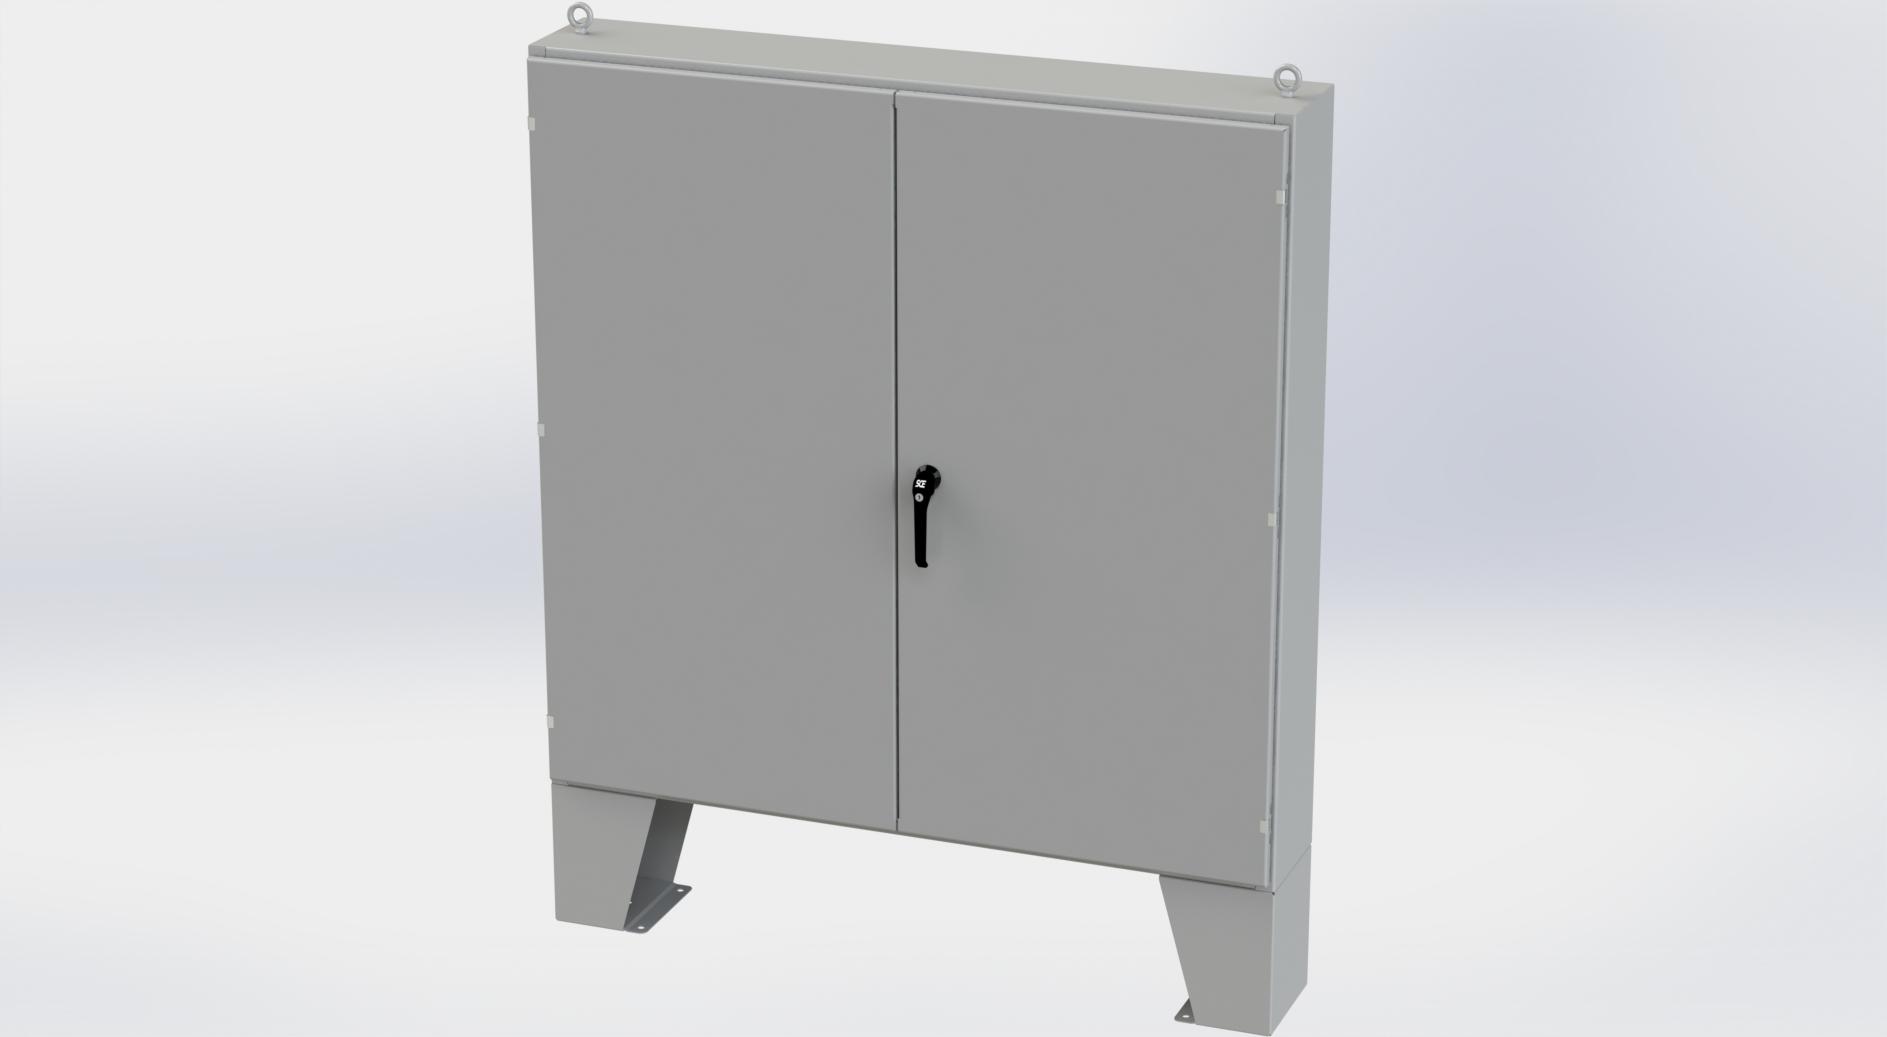 Saginaw Control SCE-606010LP 2DR LP Enclosure, Height:60.00", Width:60.00", Depth:10.00", ANSI-61 gray powder coating inside and out. Optional sub-panels are powder coated white.